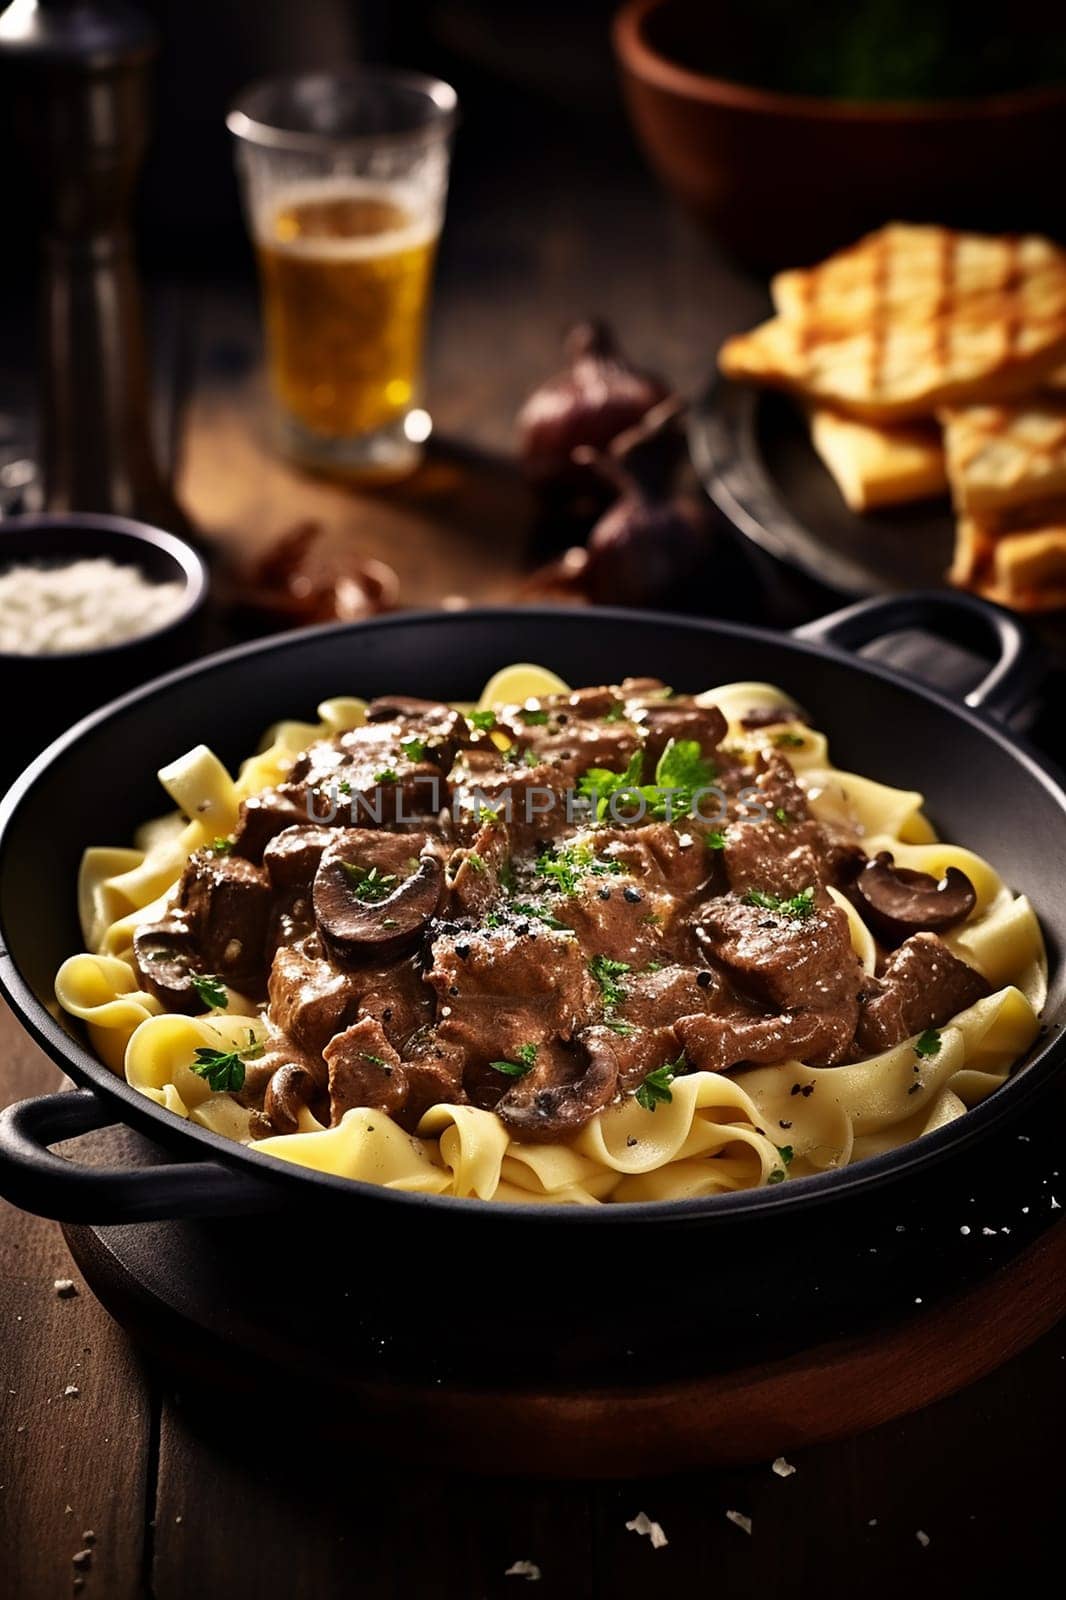 Savory beef stroganoff served over noodles garnished with parsley, paired with bread and beer.